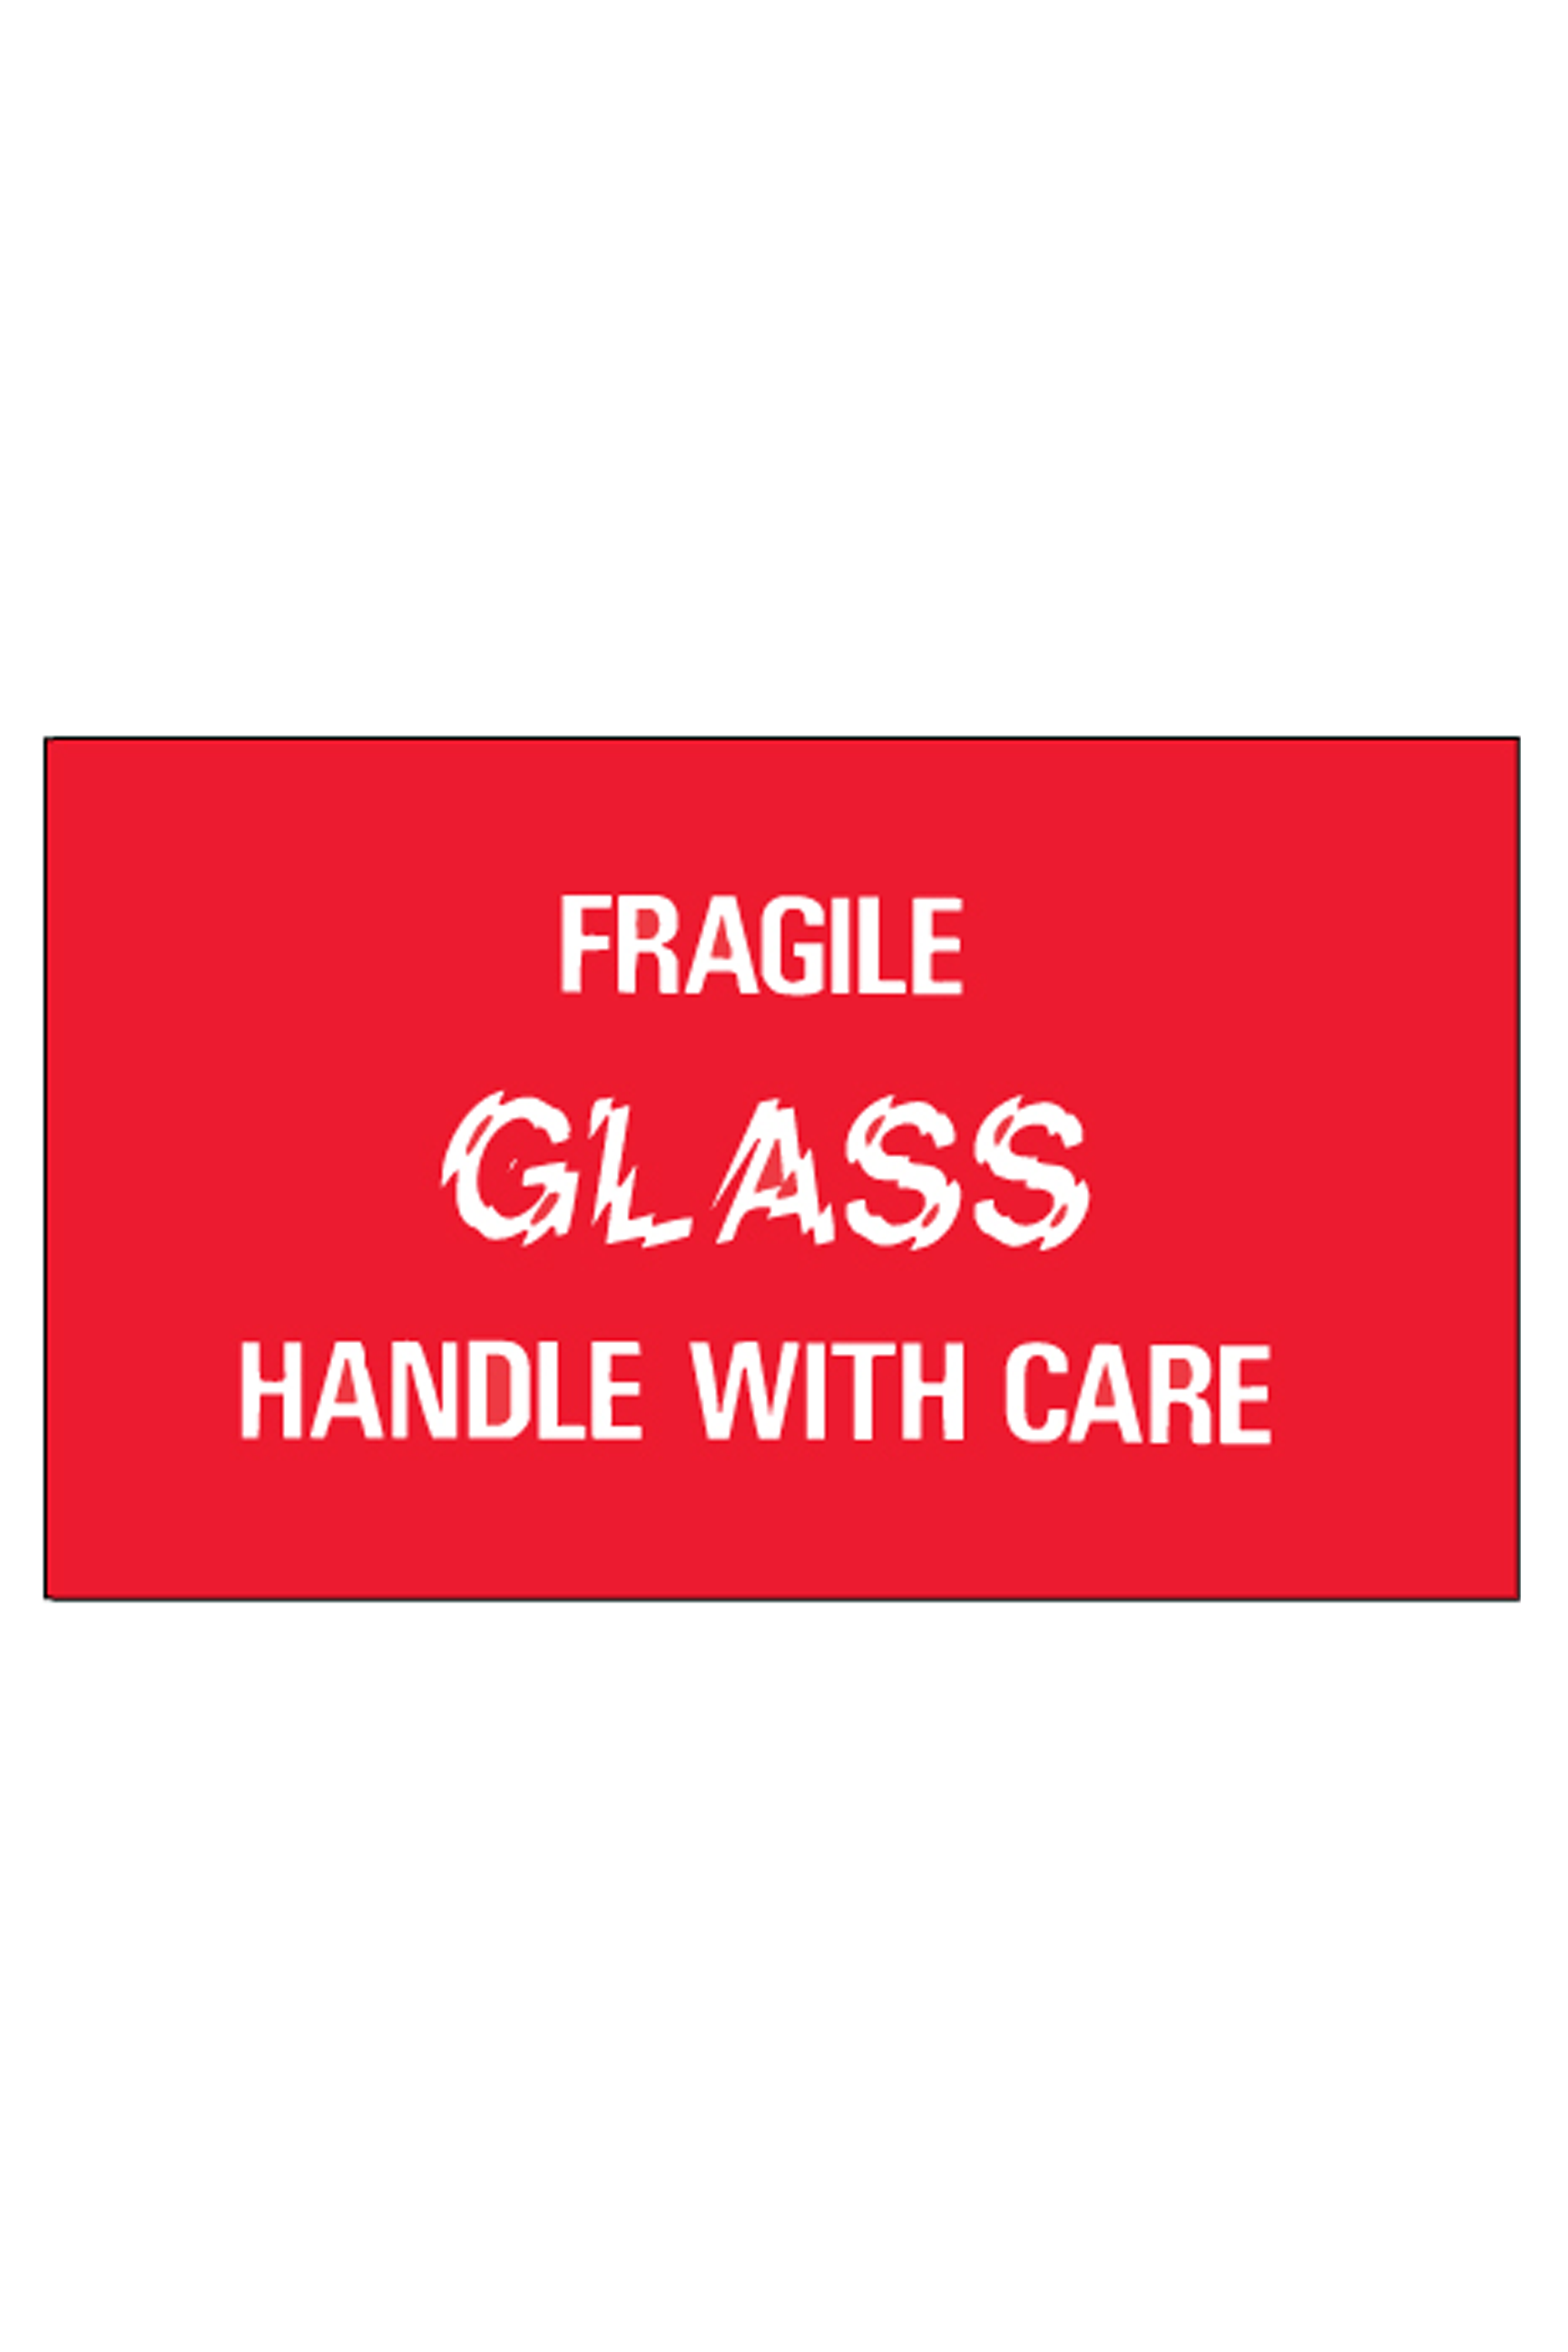 Fragile/Glass Handle with Care